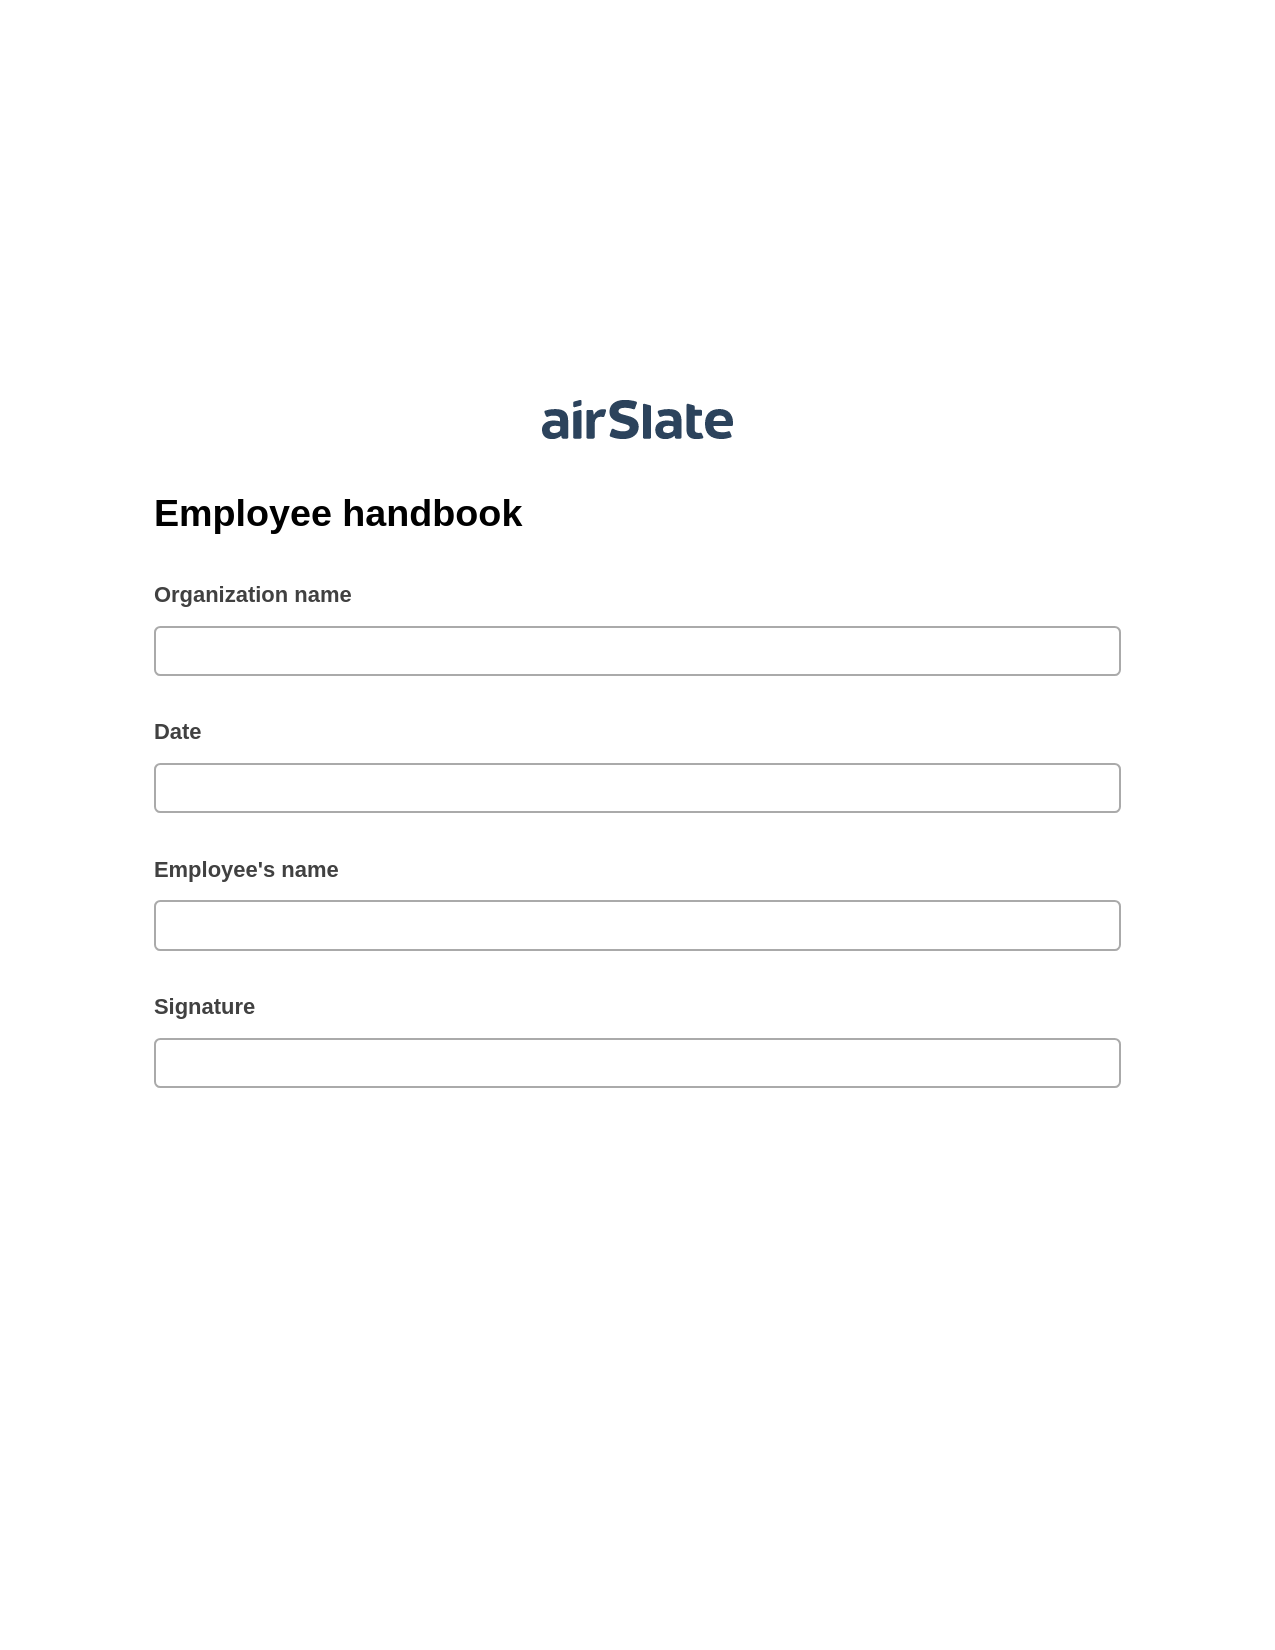 Employee handbook Pre-fill from Salesforce Records with SOQL Bot, Update Salesforce Record Bot, Export to Google Sheet Bot